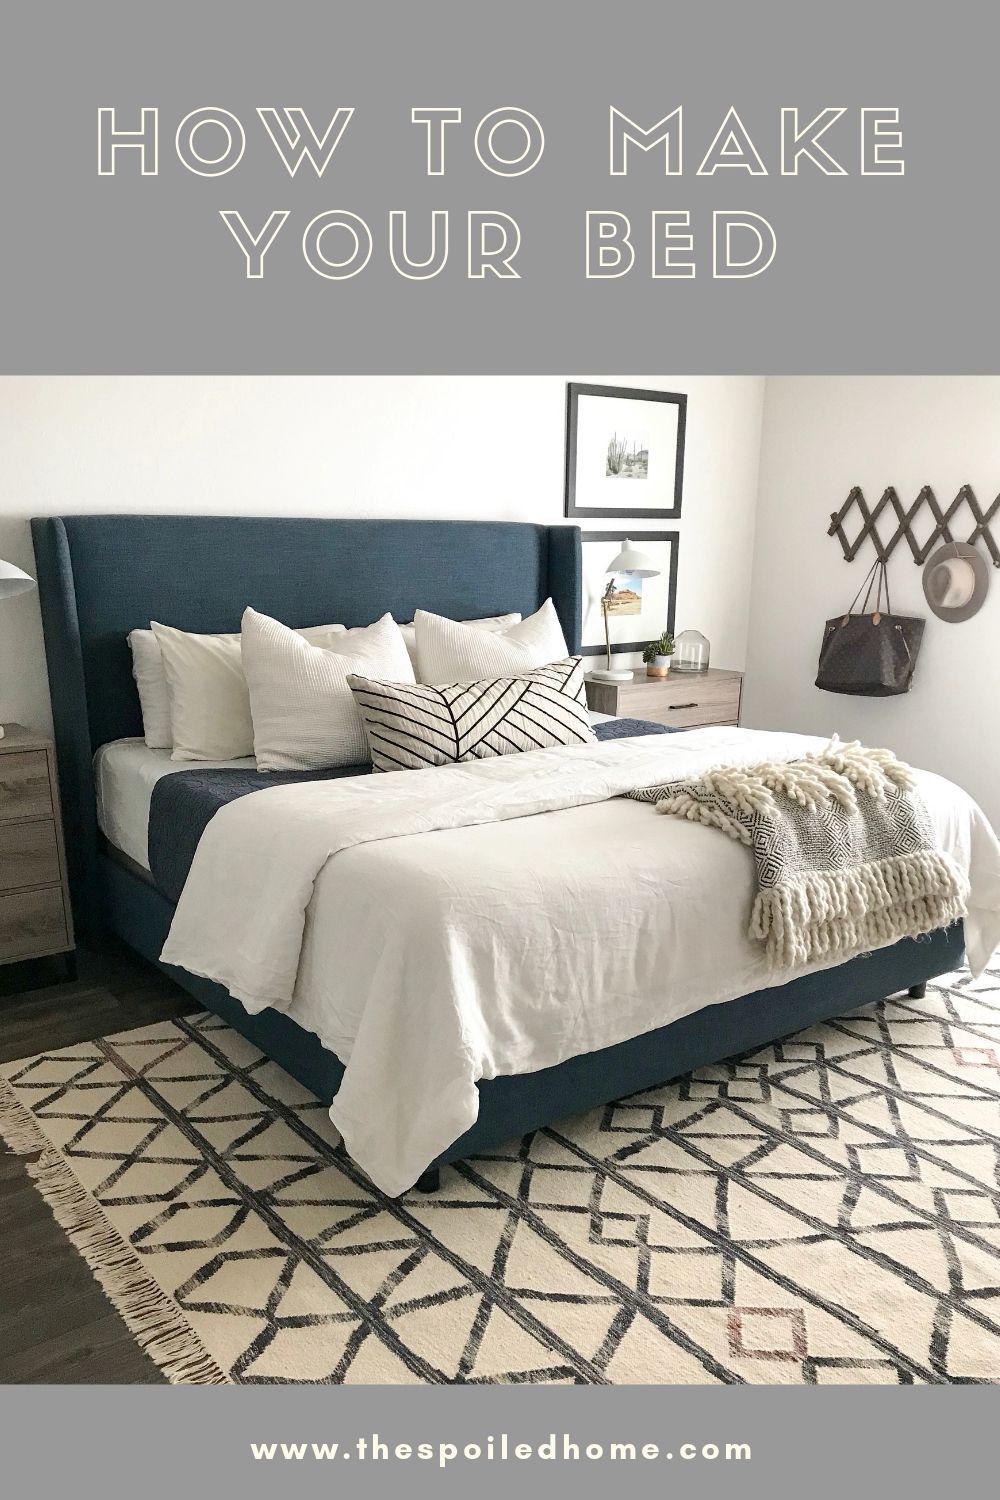 Our Top DIY Posts ? How To Make Your Bed - Our Top DIY Posts ? How To Make Your Bed -   19 diy Bedroom modern ideas